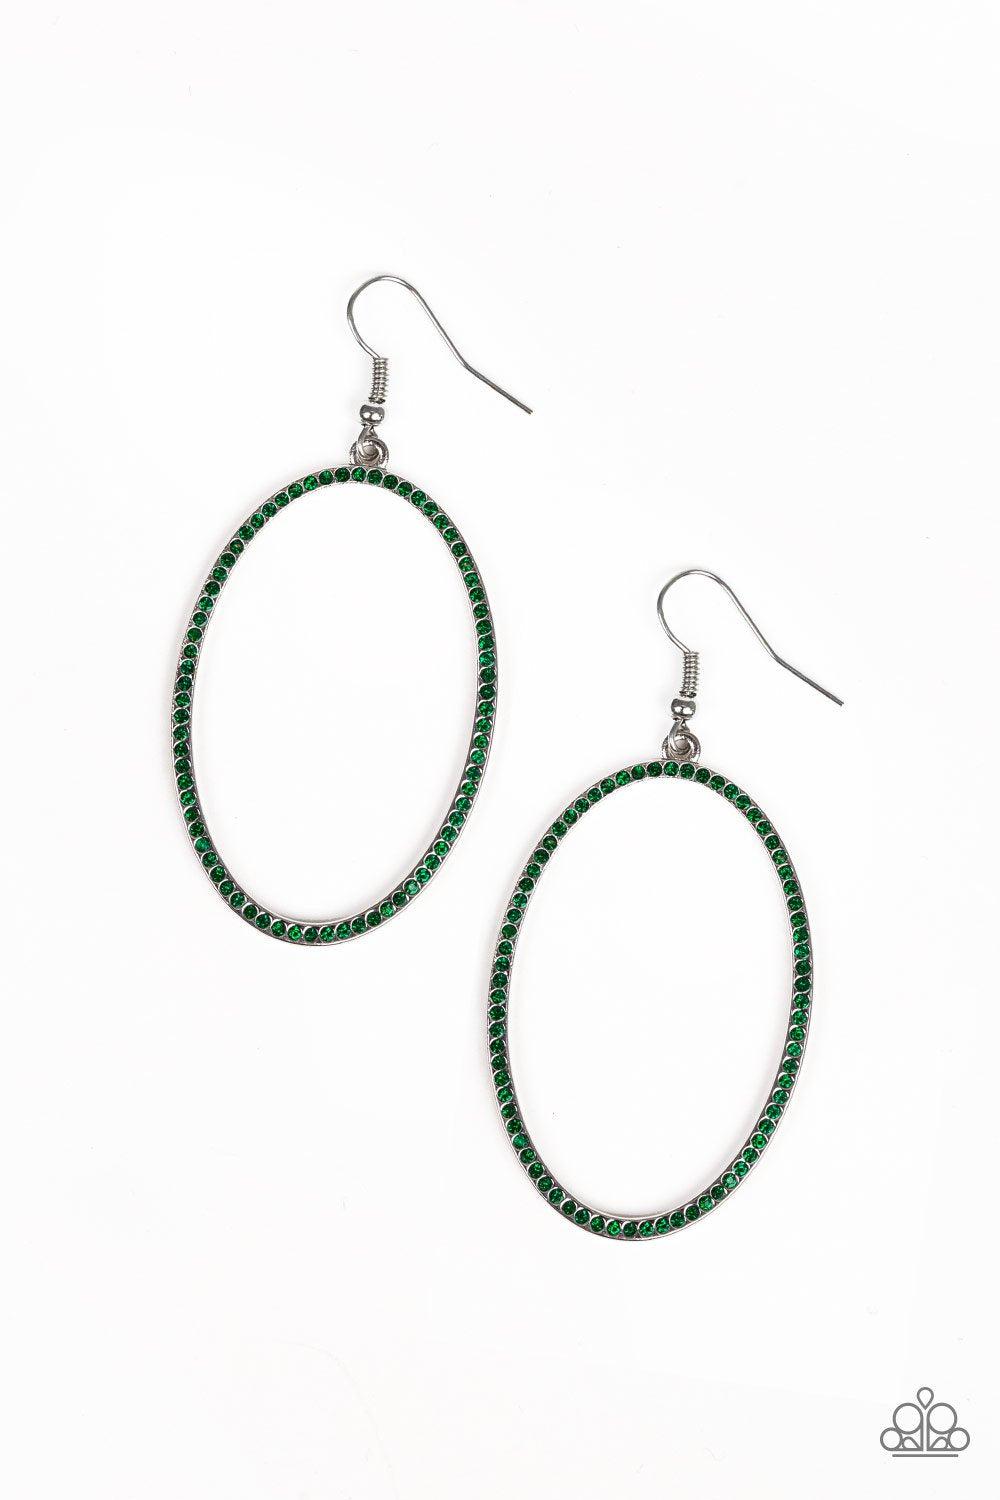 Dazzle On Demand Green Gem Earrings - Paparazzi Accessories-CarasShop.com - $5 Jewelry by Cara Jewels